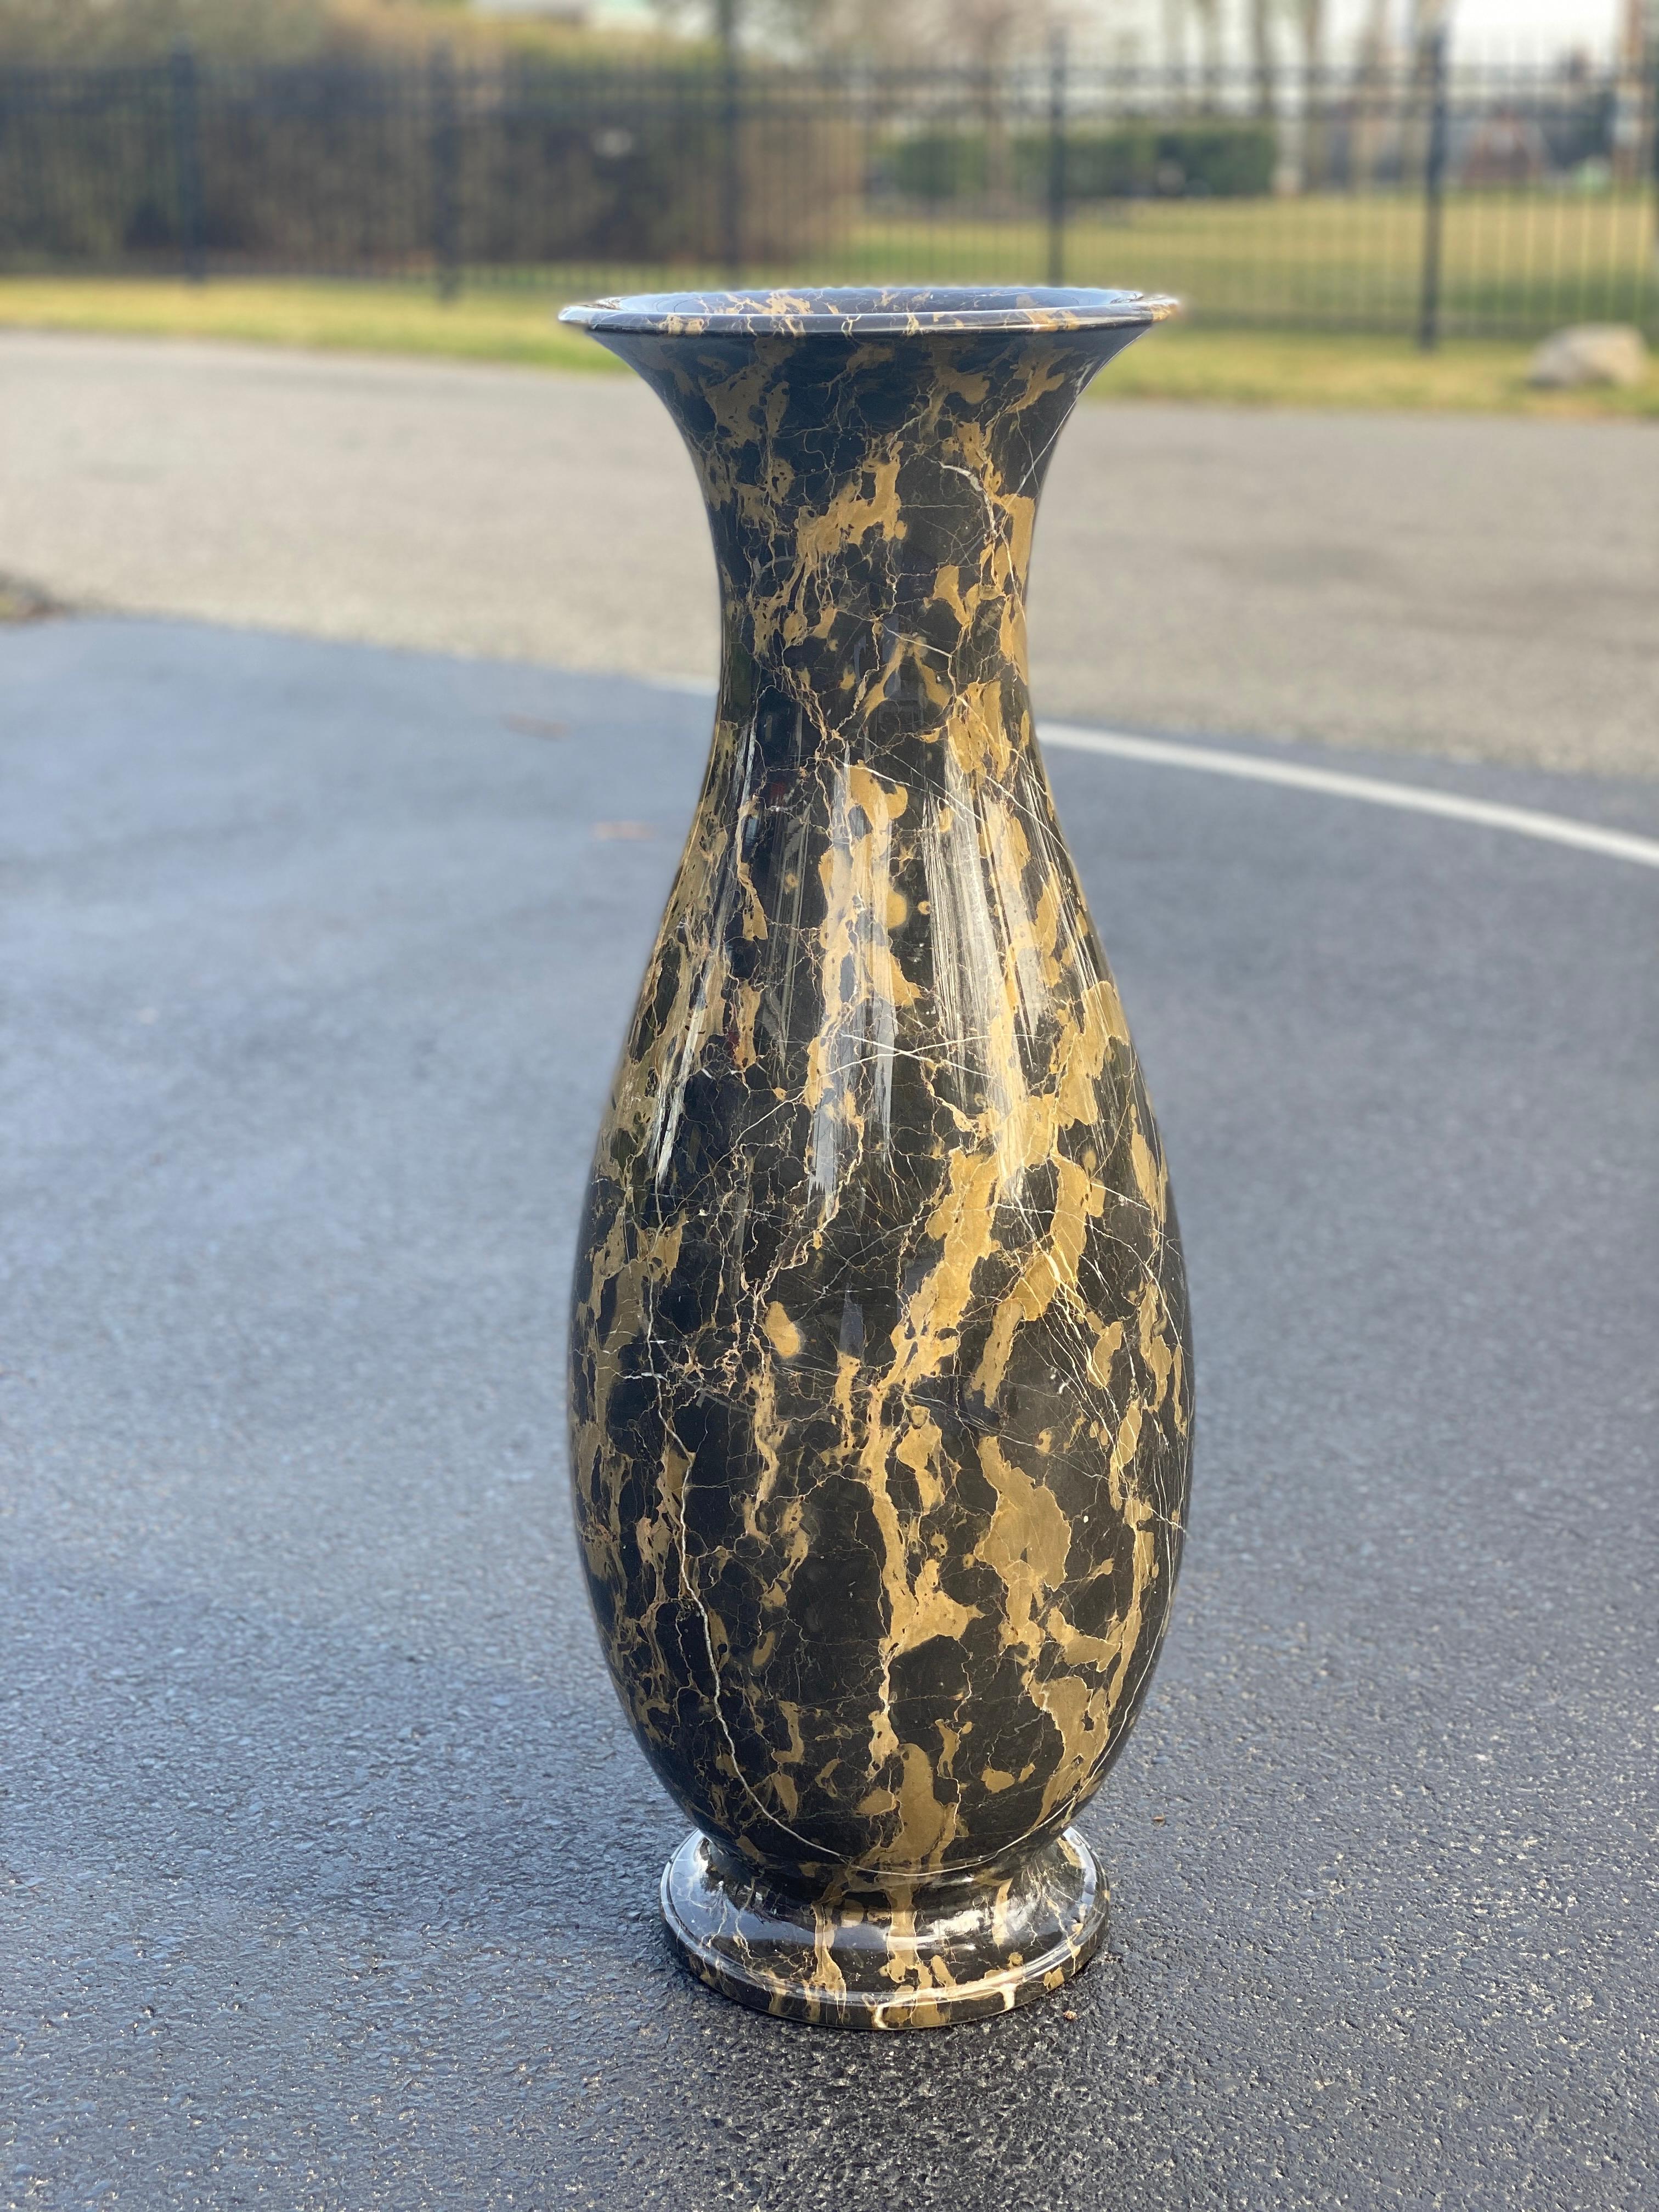 Very tall floor vase or urn, the polished marble vessel has dark brown color with defined white and golden veins which are the qualities that highlighted the beauty of this stone for many centuries. The vessel is very heavy and perfectly suited for